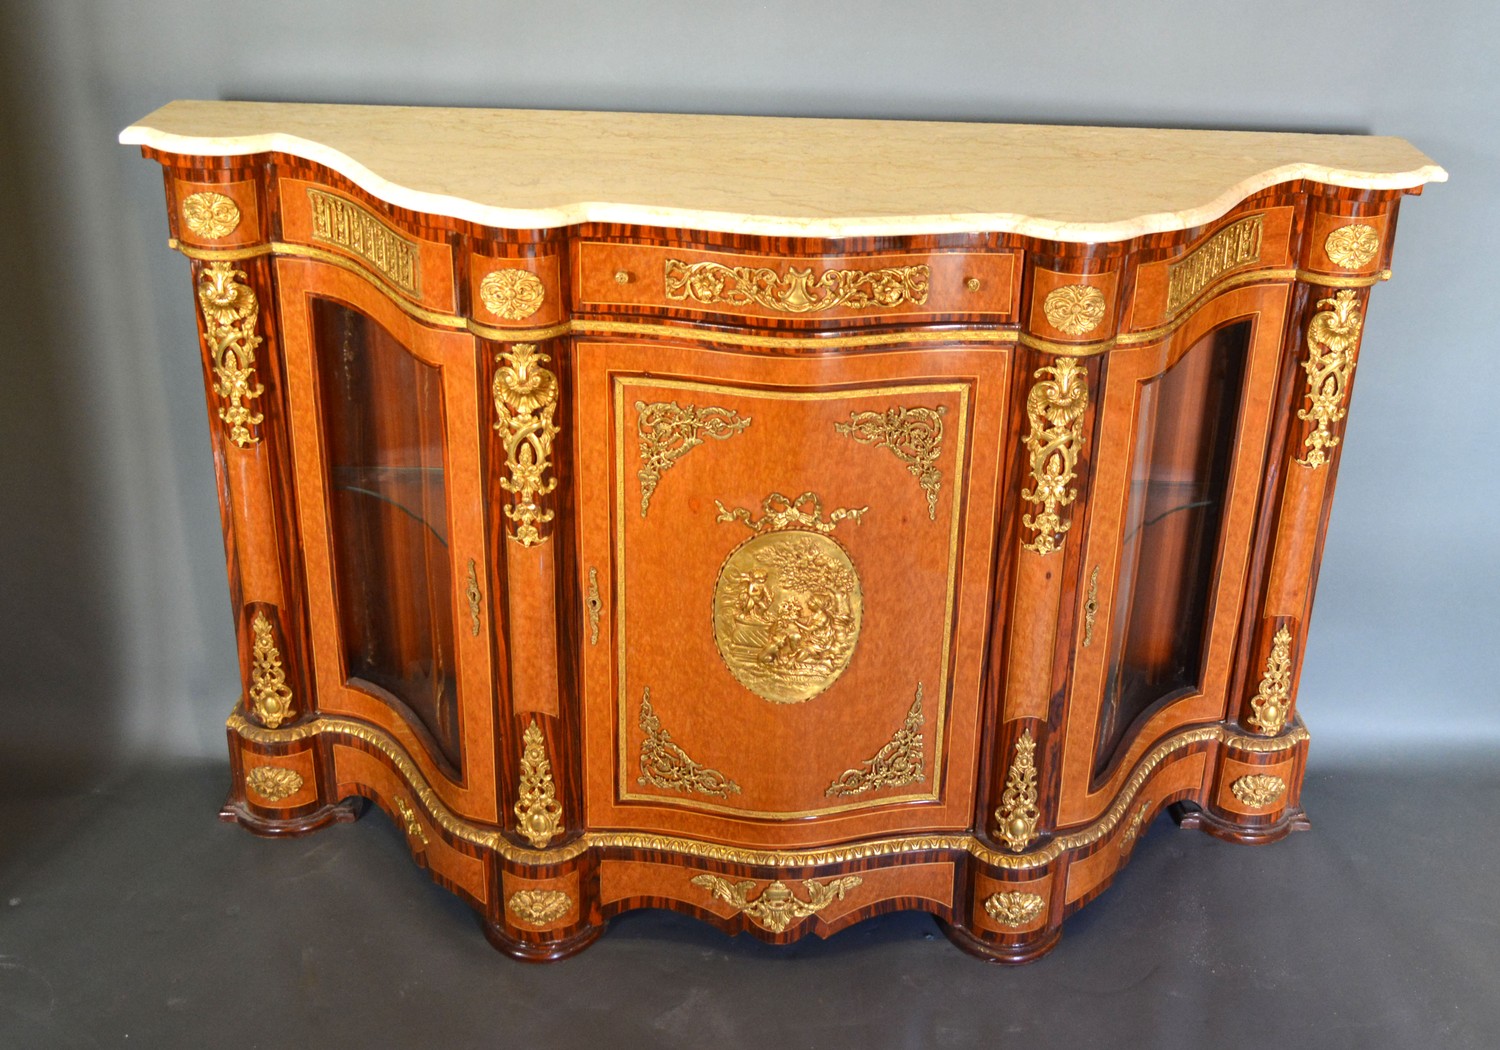 A French style walnut, gilt metal mounted serpentine Credenza cabinet, the variegated marble top - Image 3 of 3